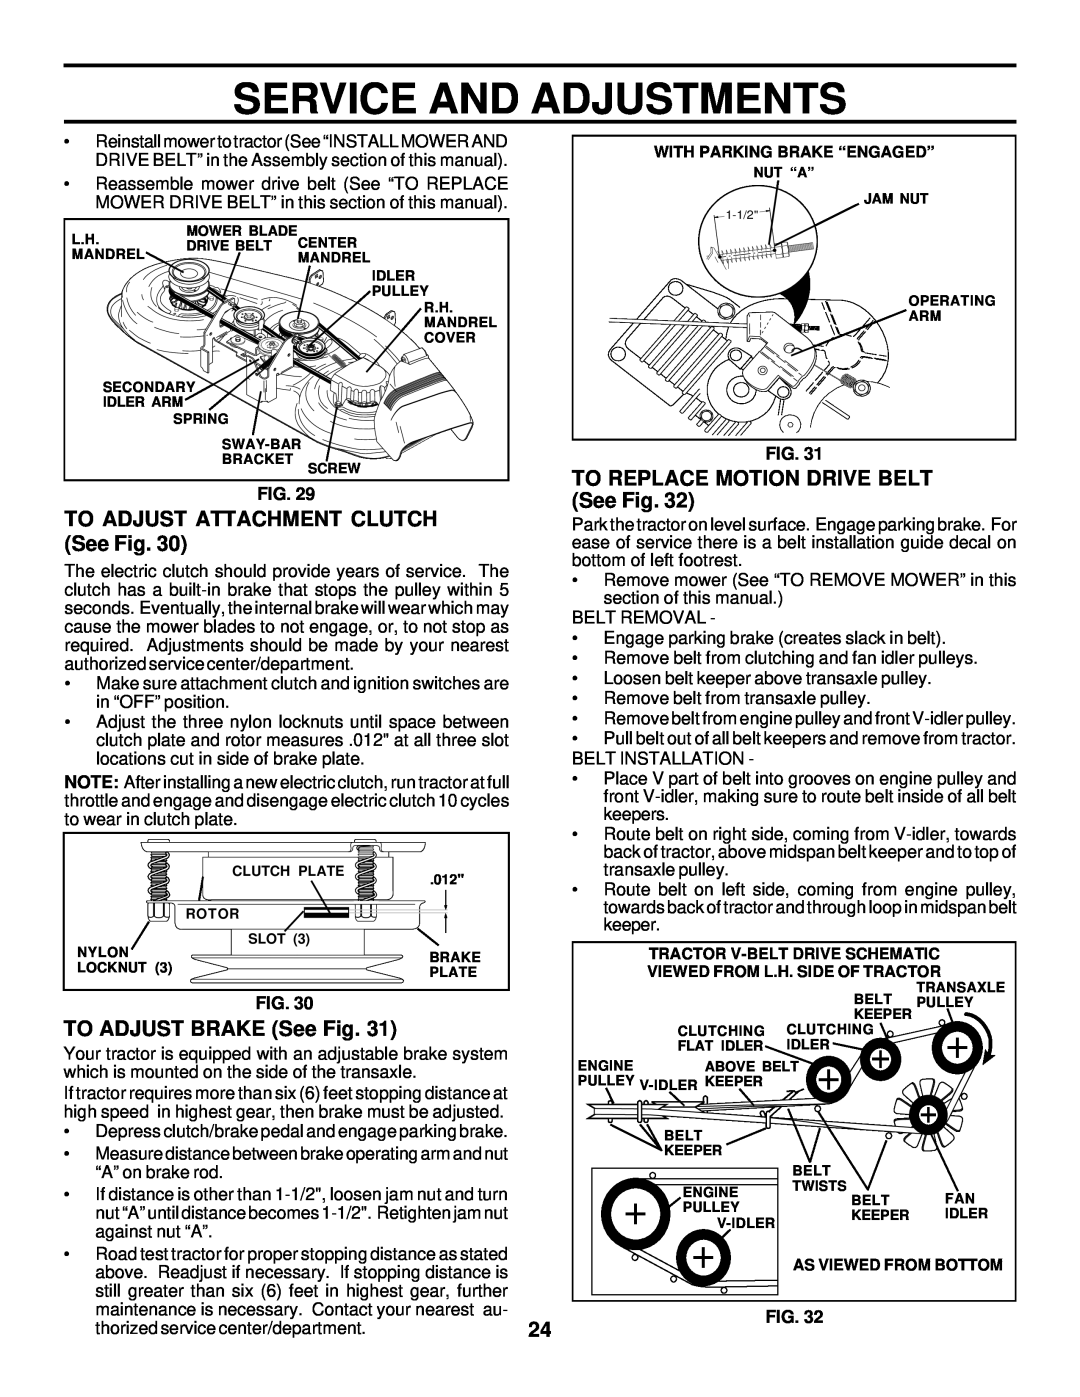 Husqvarna GTH225 owner manual To Replace Motion Drive Belt, TO ADJUST ATTACHMENT CLUTCH See Fig, TO ADJUST BRAKE See Fig 